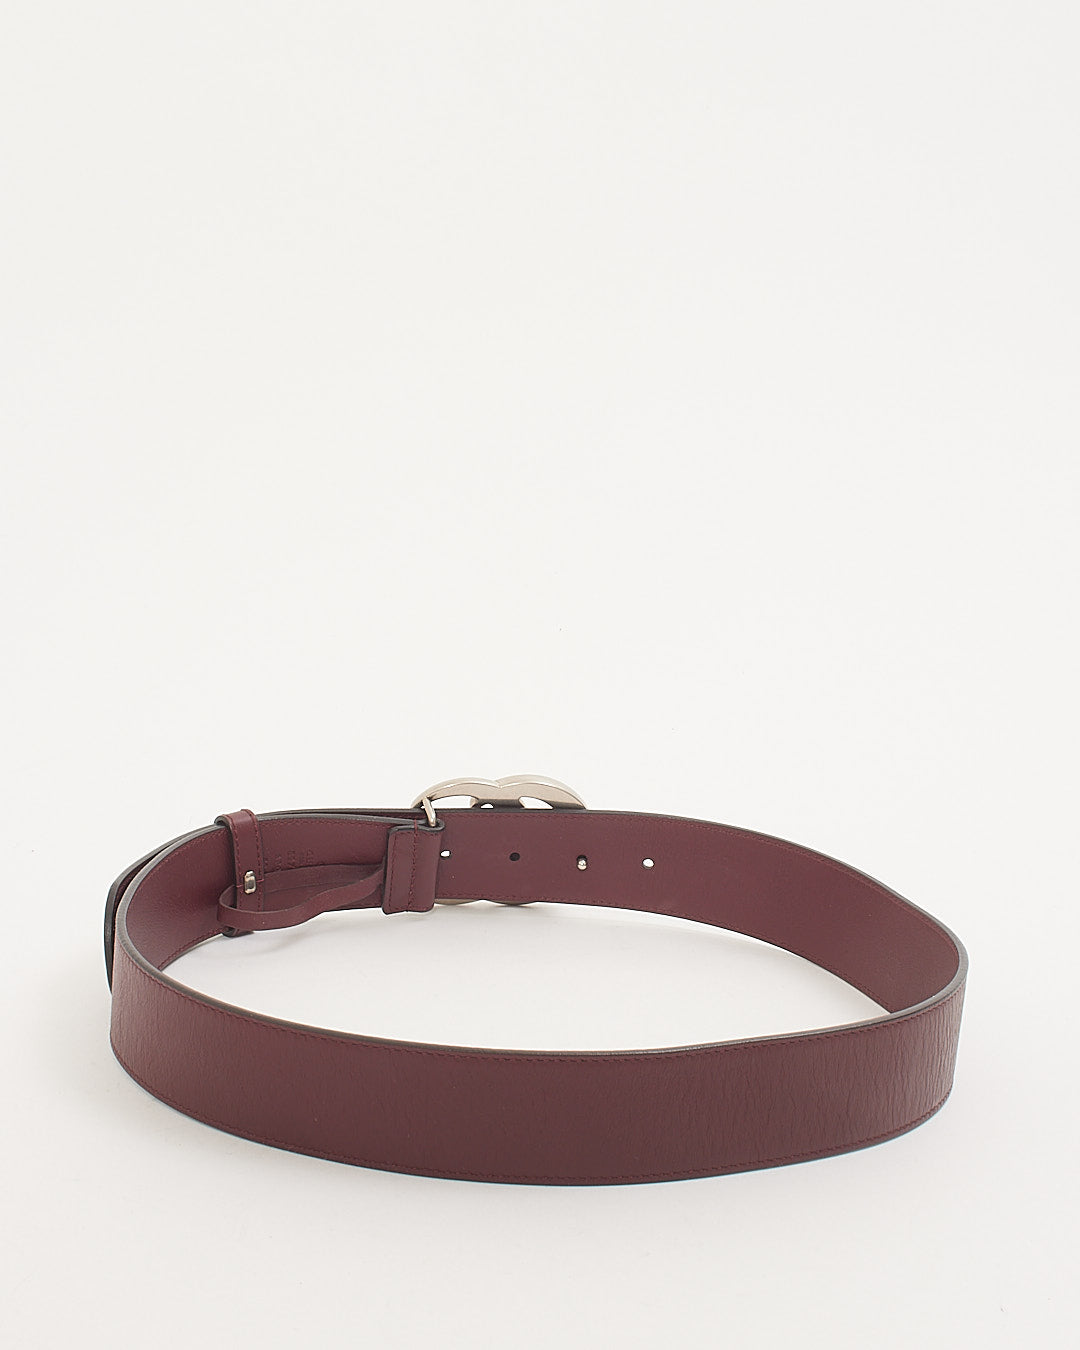 Gucci Burgundy Leather Double G Buckle Marmont Belt - 80/32